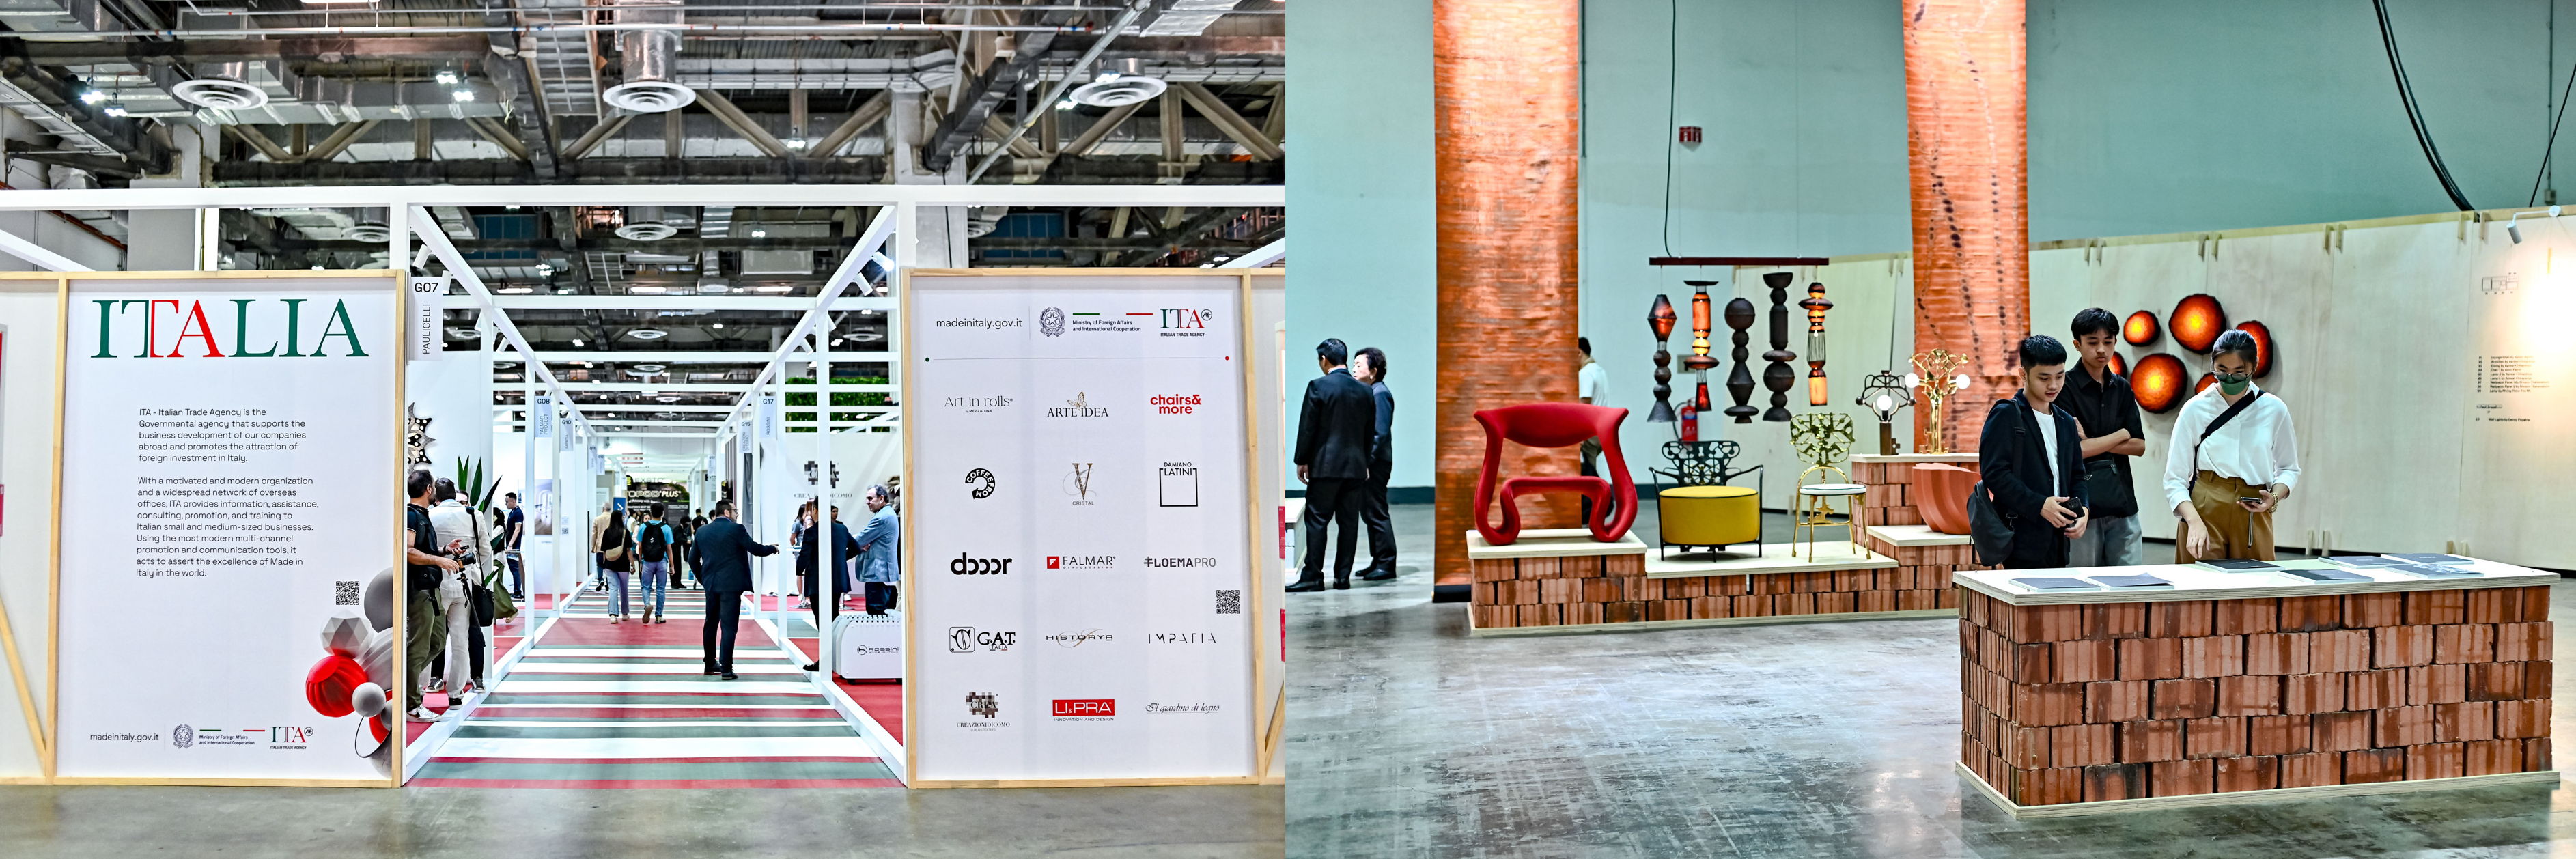 From left: Italia Geniale and EMERGE@FIND at FIND – Design Fair Asia. Photo courtesy of FIND – Design Fair Asia.